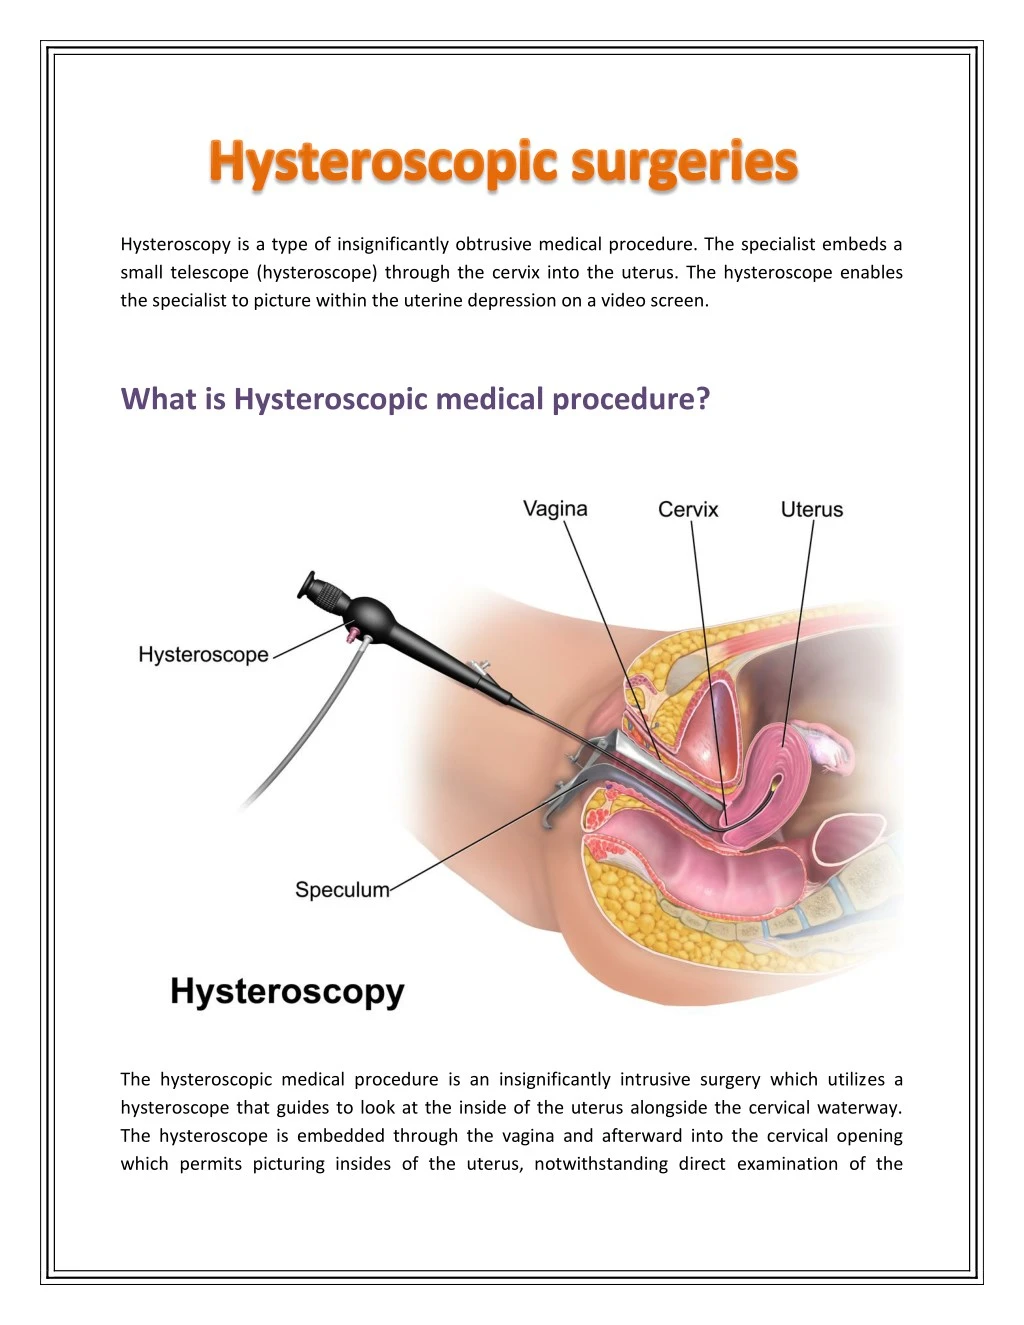 hysteroscopy is a type of insignificantly